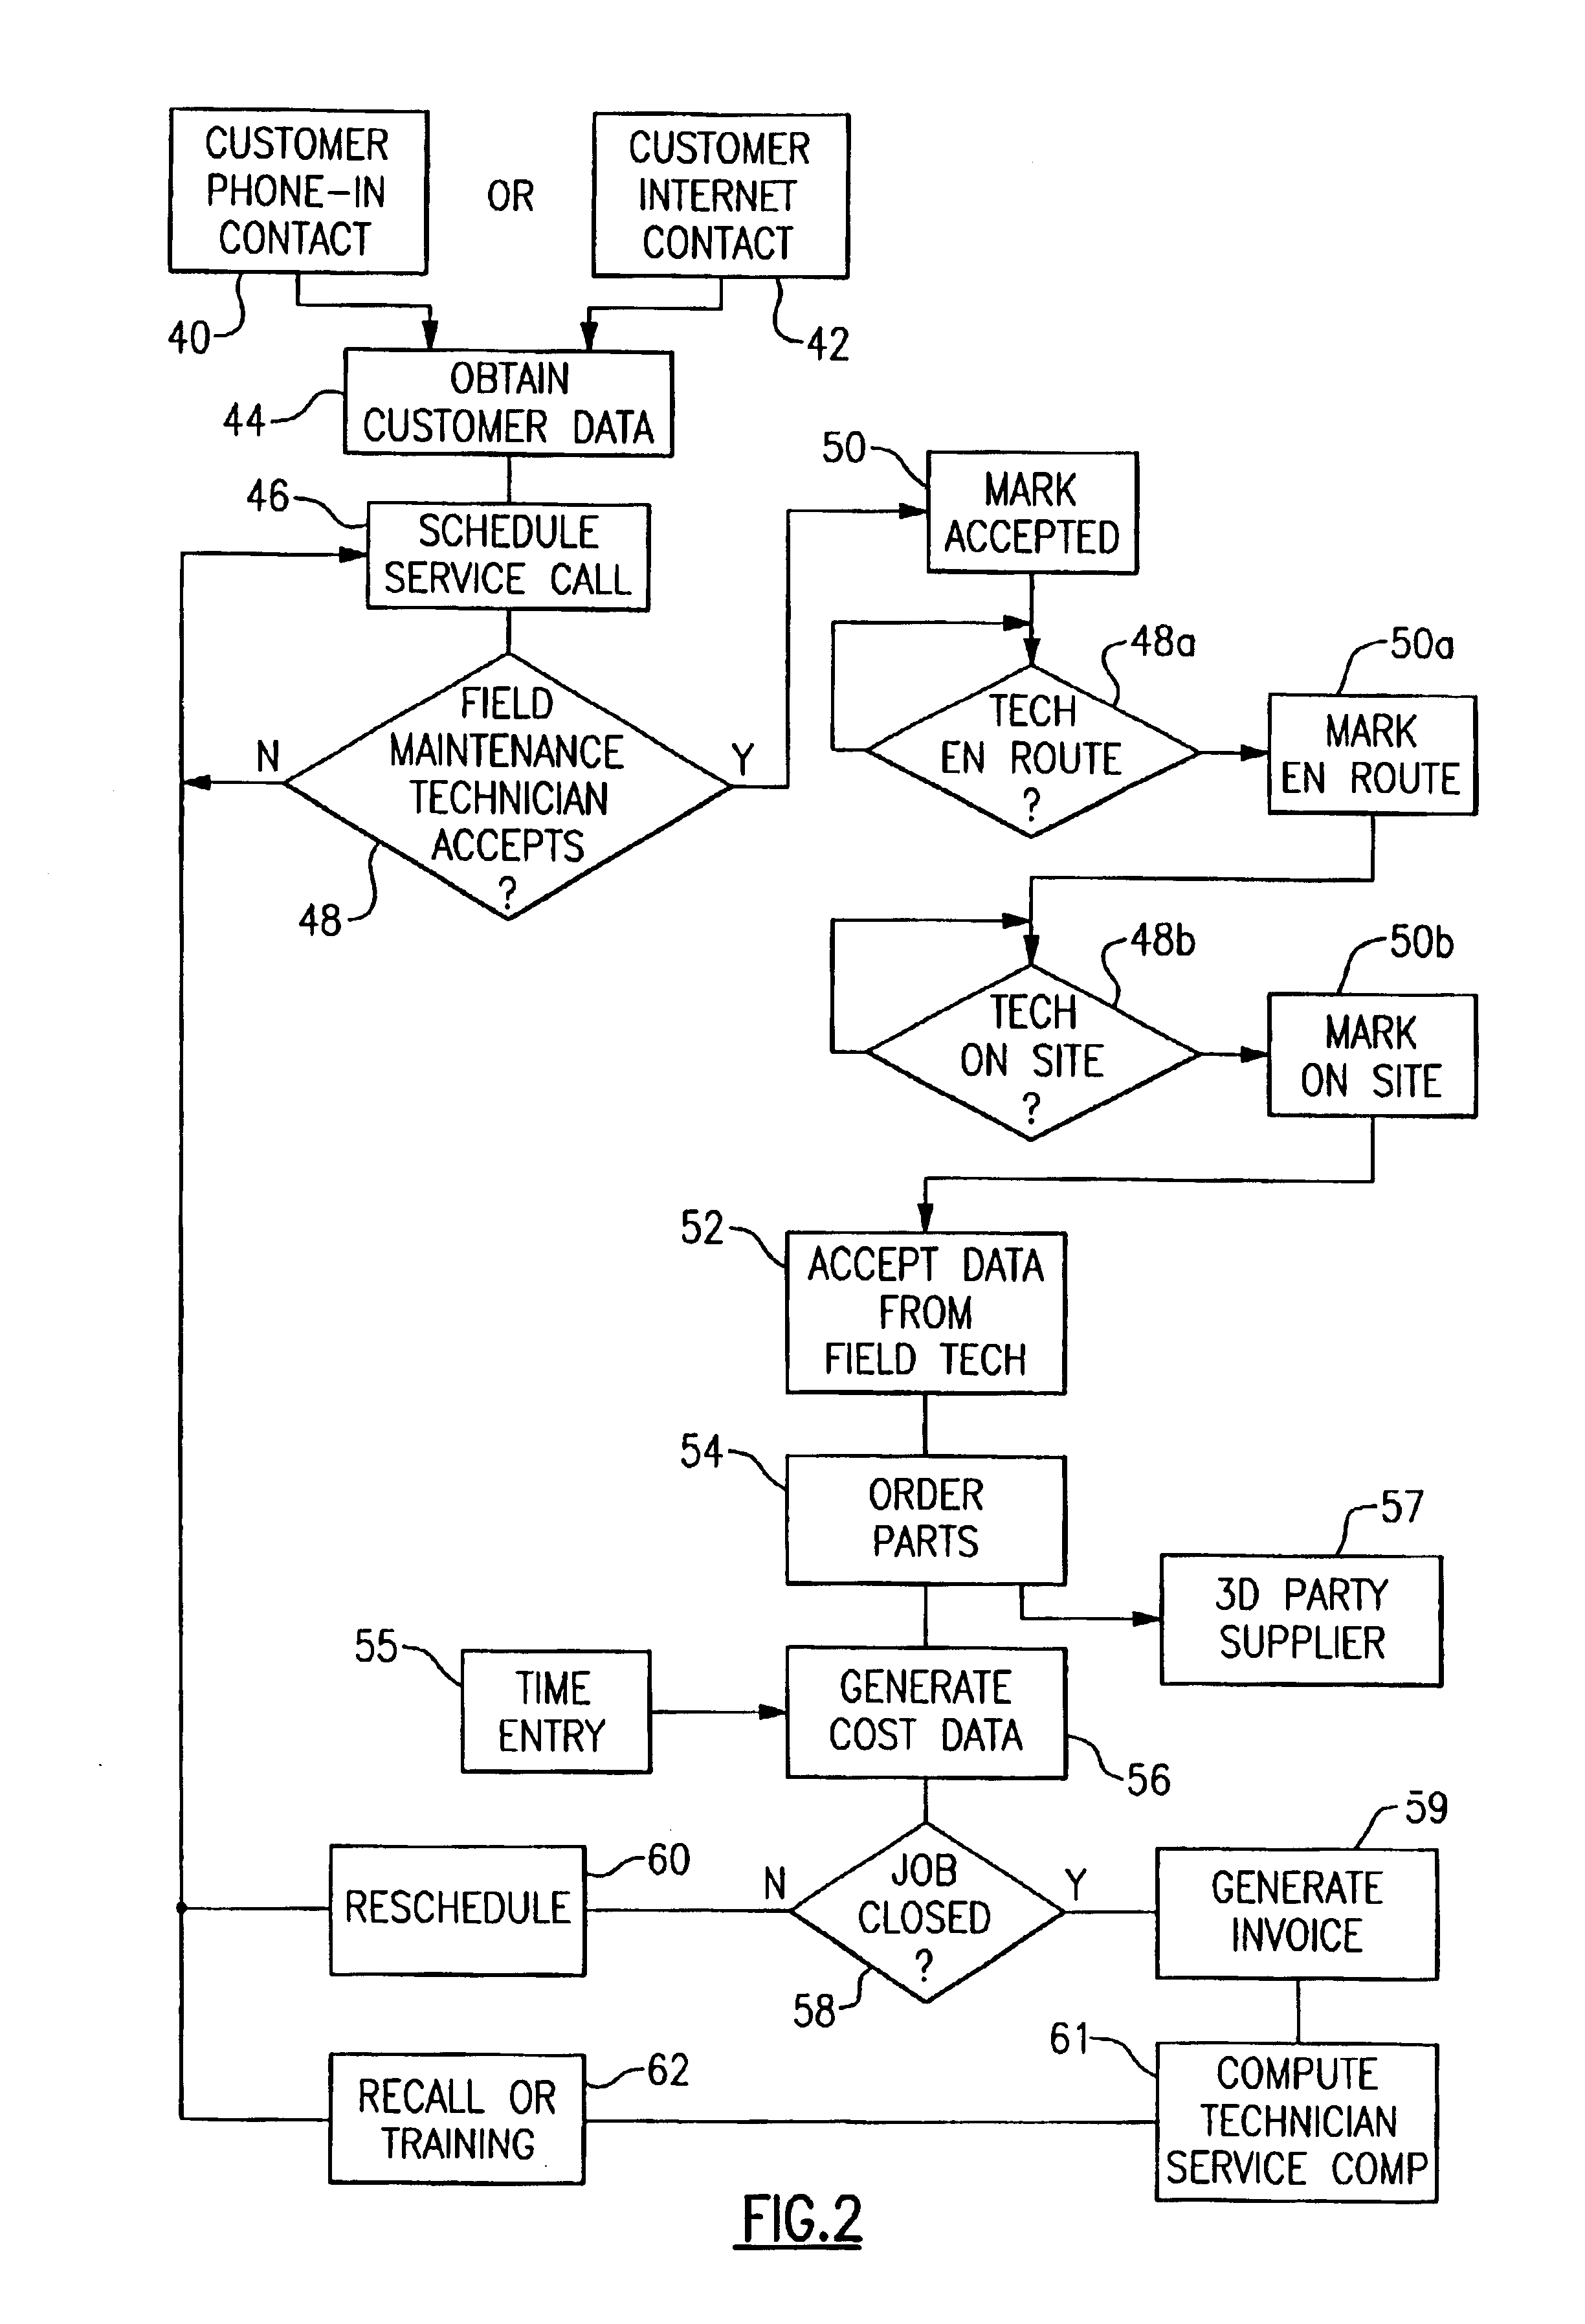 Method of processing and billing work orders